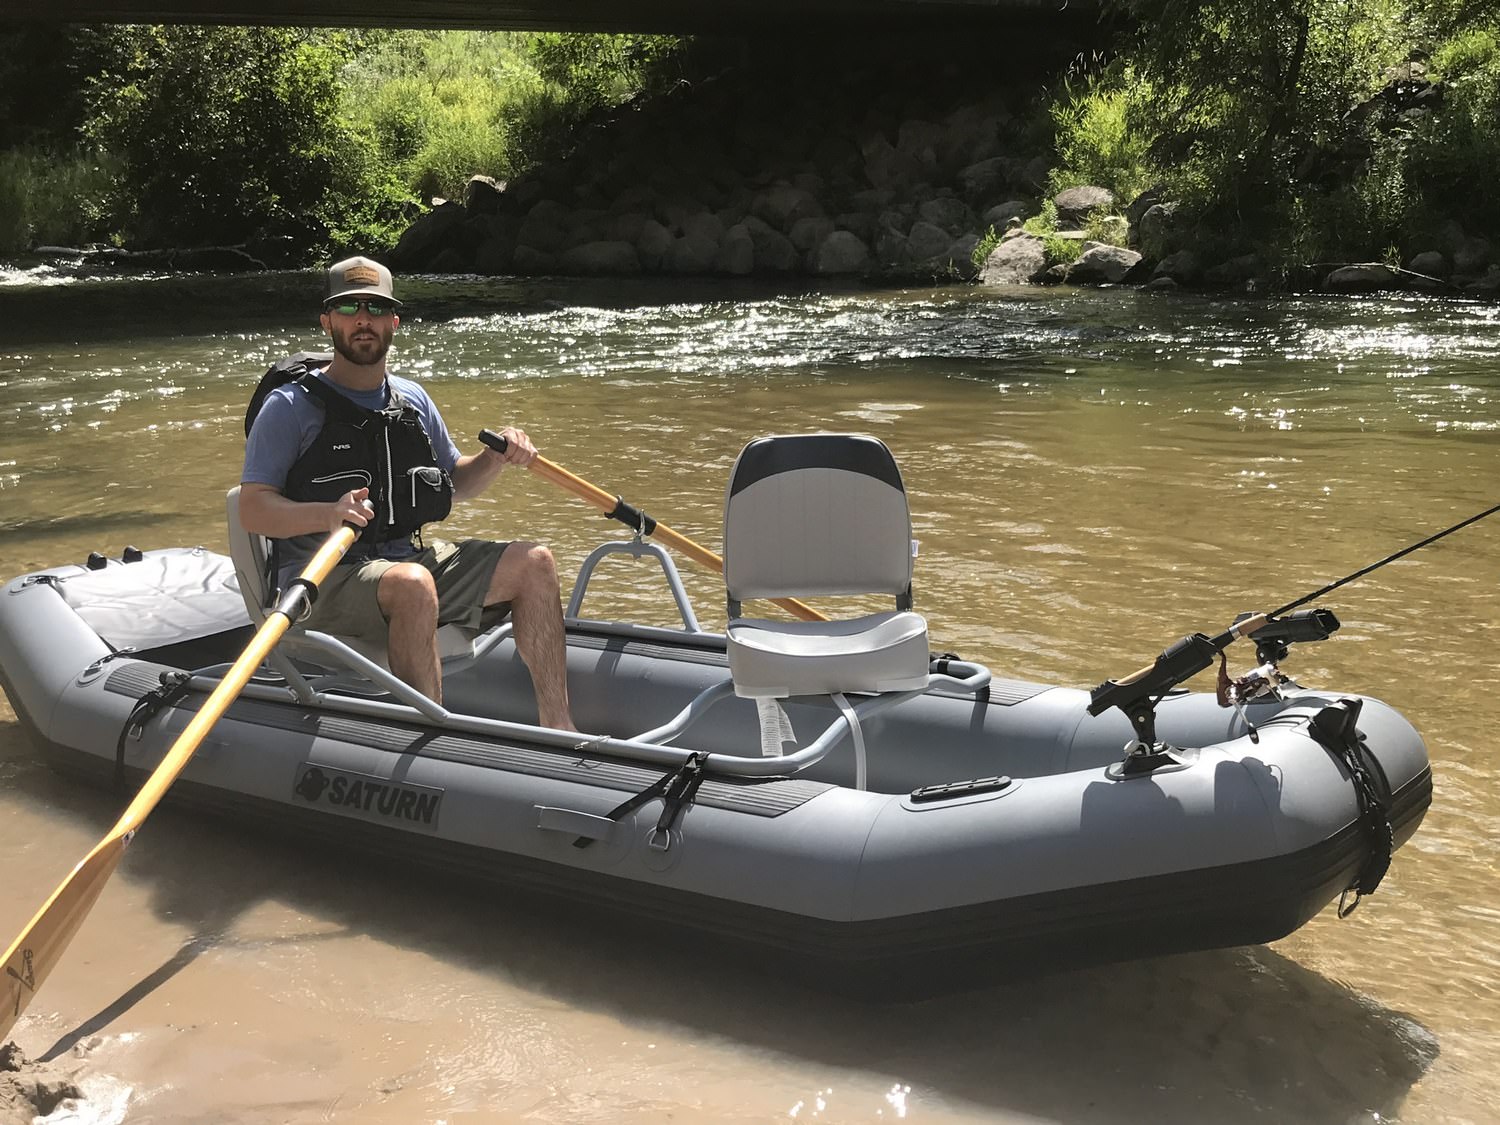 12.5' Commercial Grade Saturn Inflatable Fly Fishing Drift River Raft.